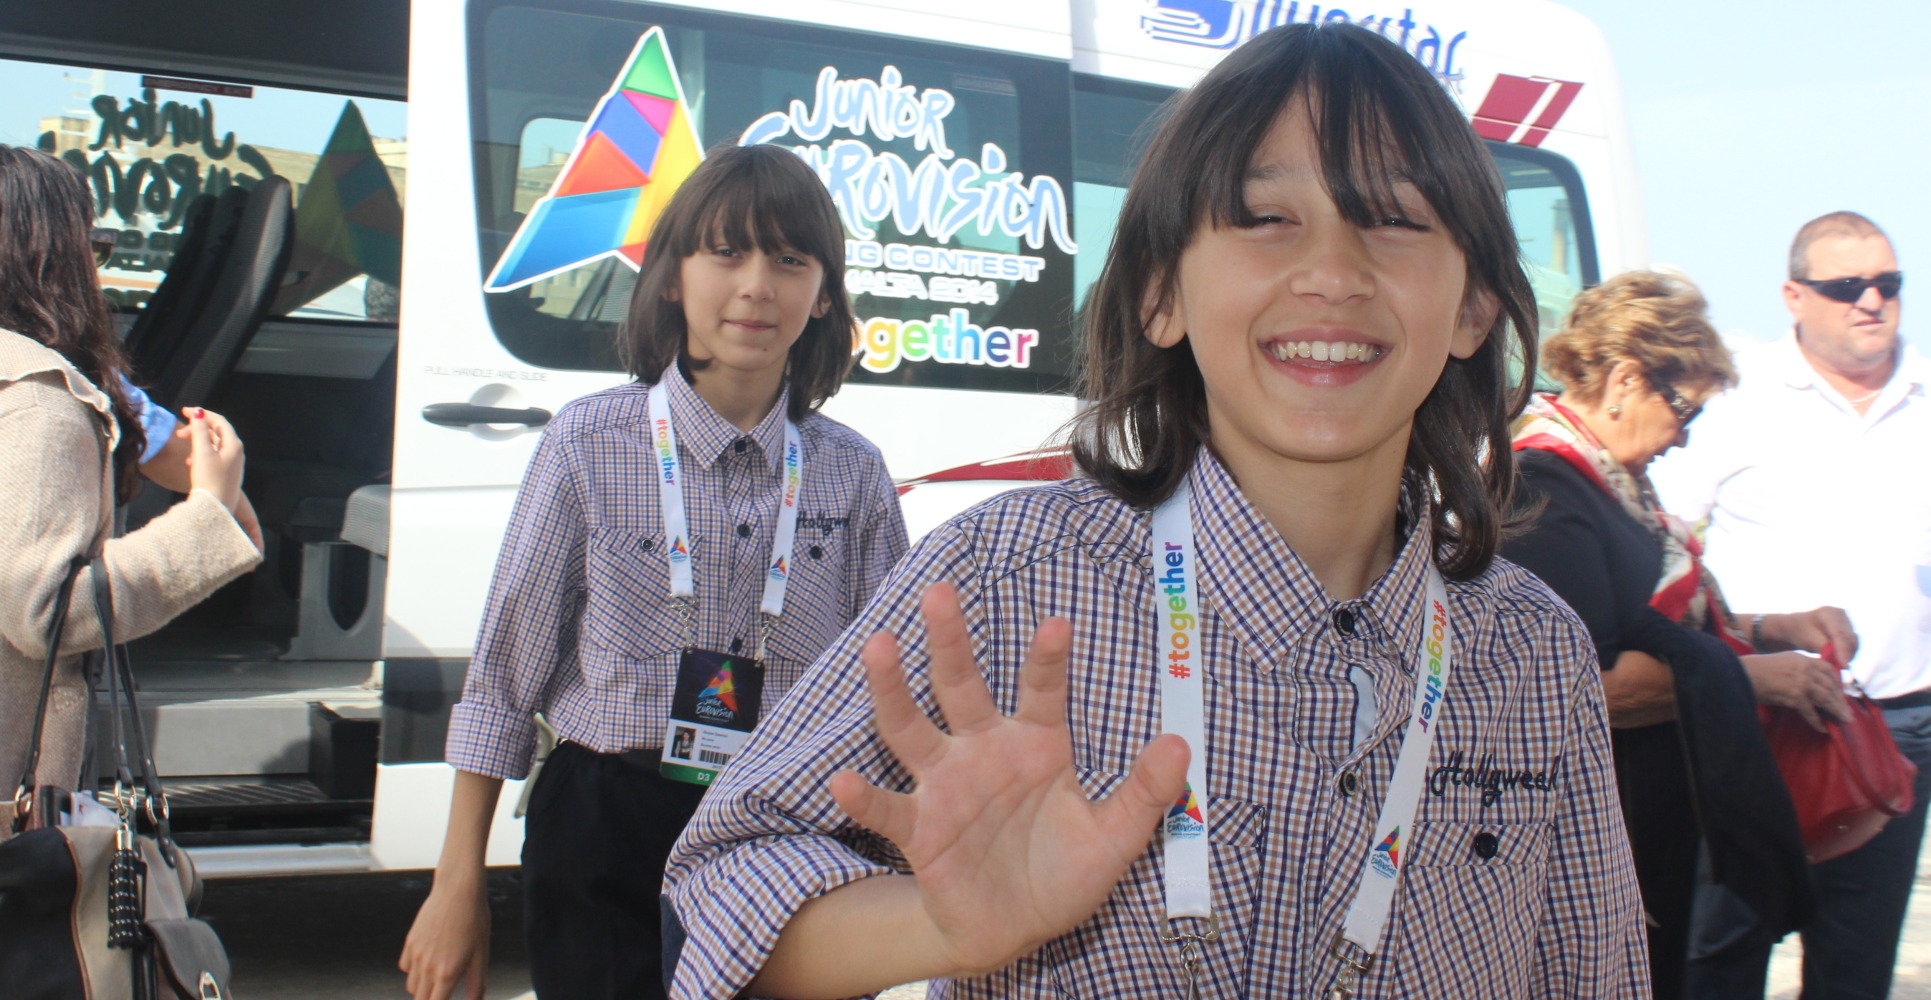 Junior Eurovision: How the delegations arrived the day of the show (Exclusive Video)